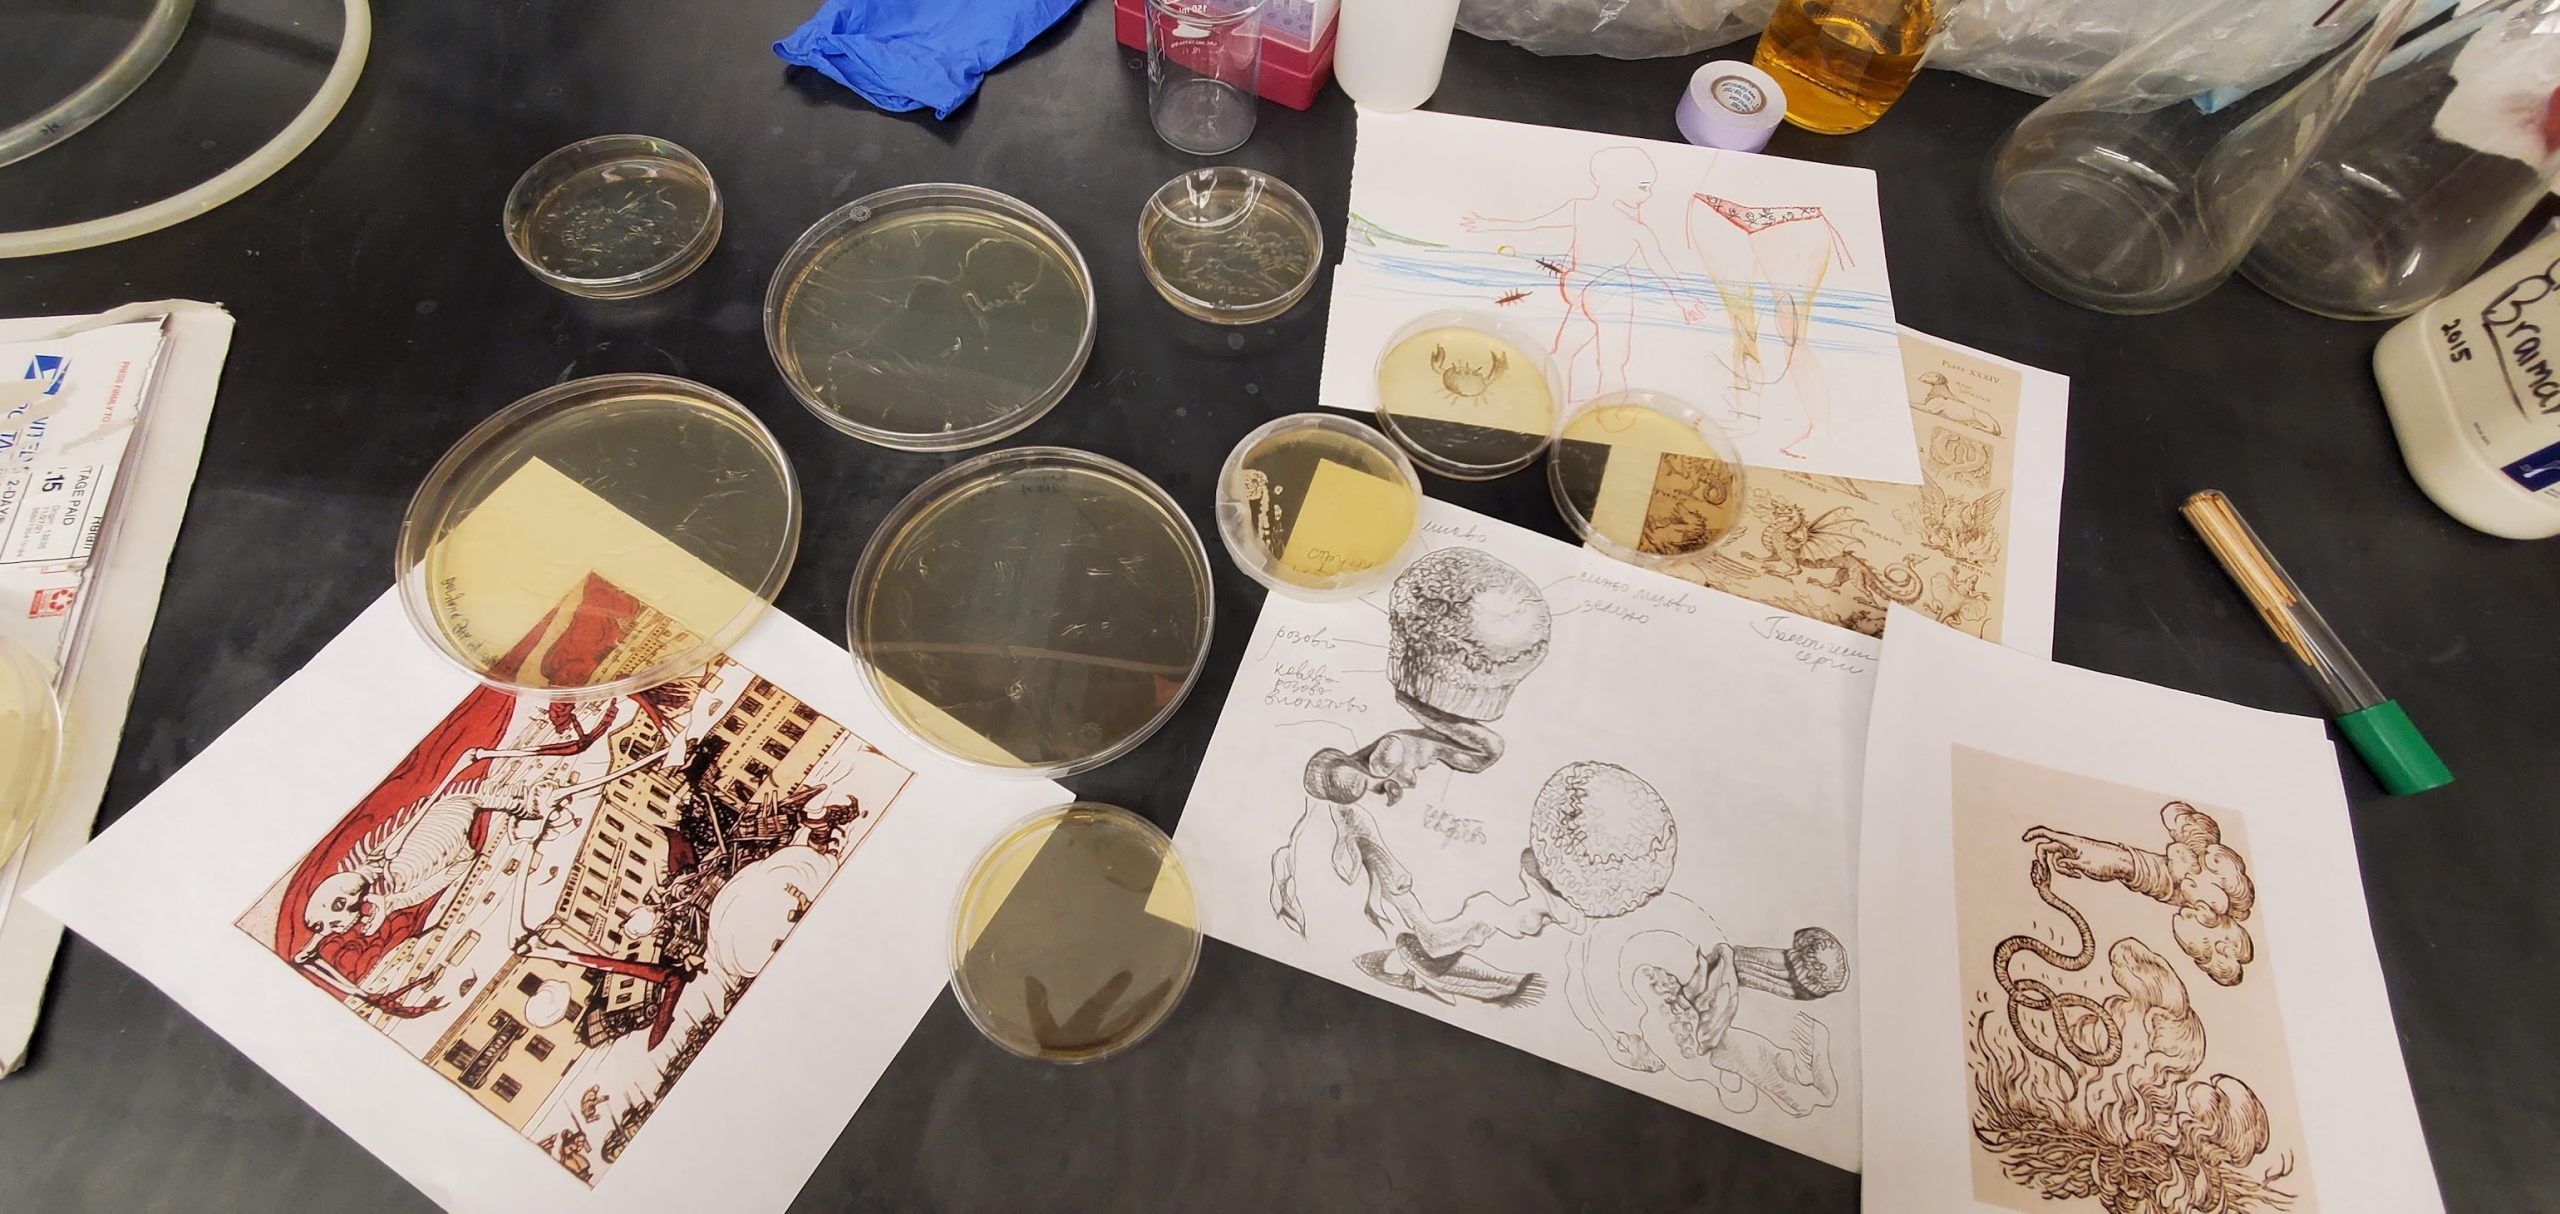 Bio-inspired art pictures with petri dishes on a benchtop